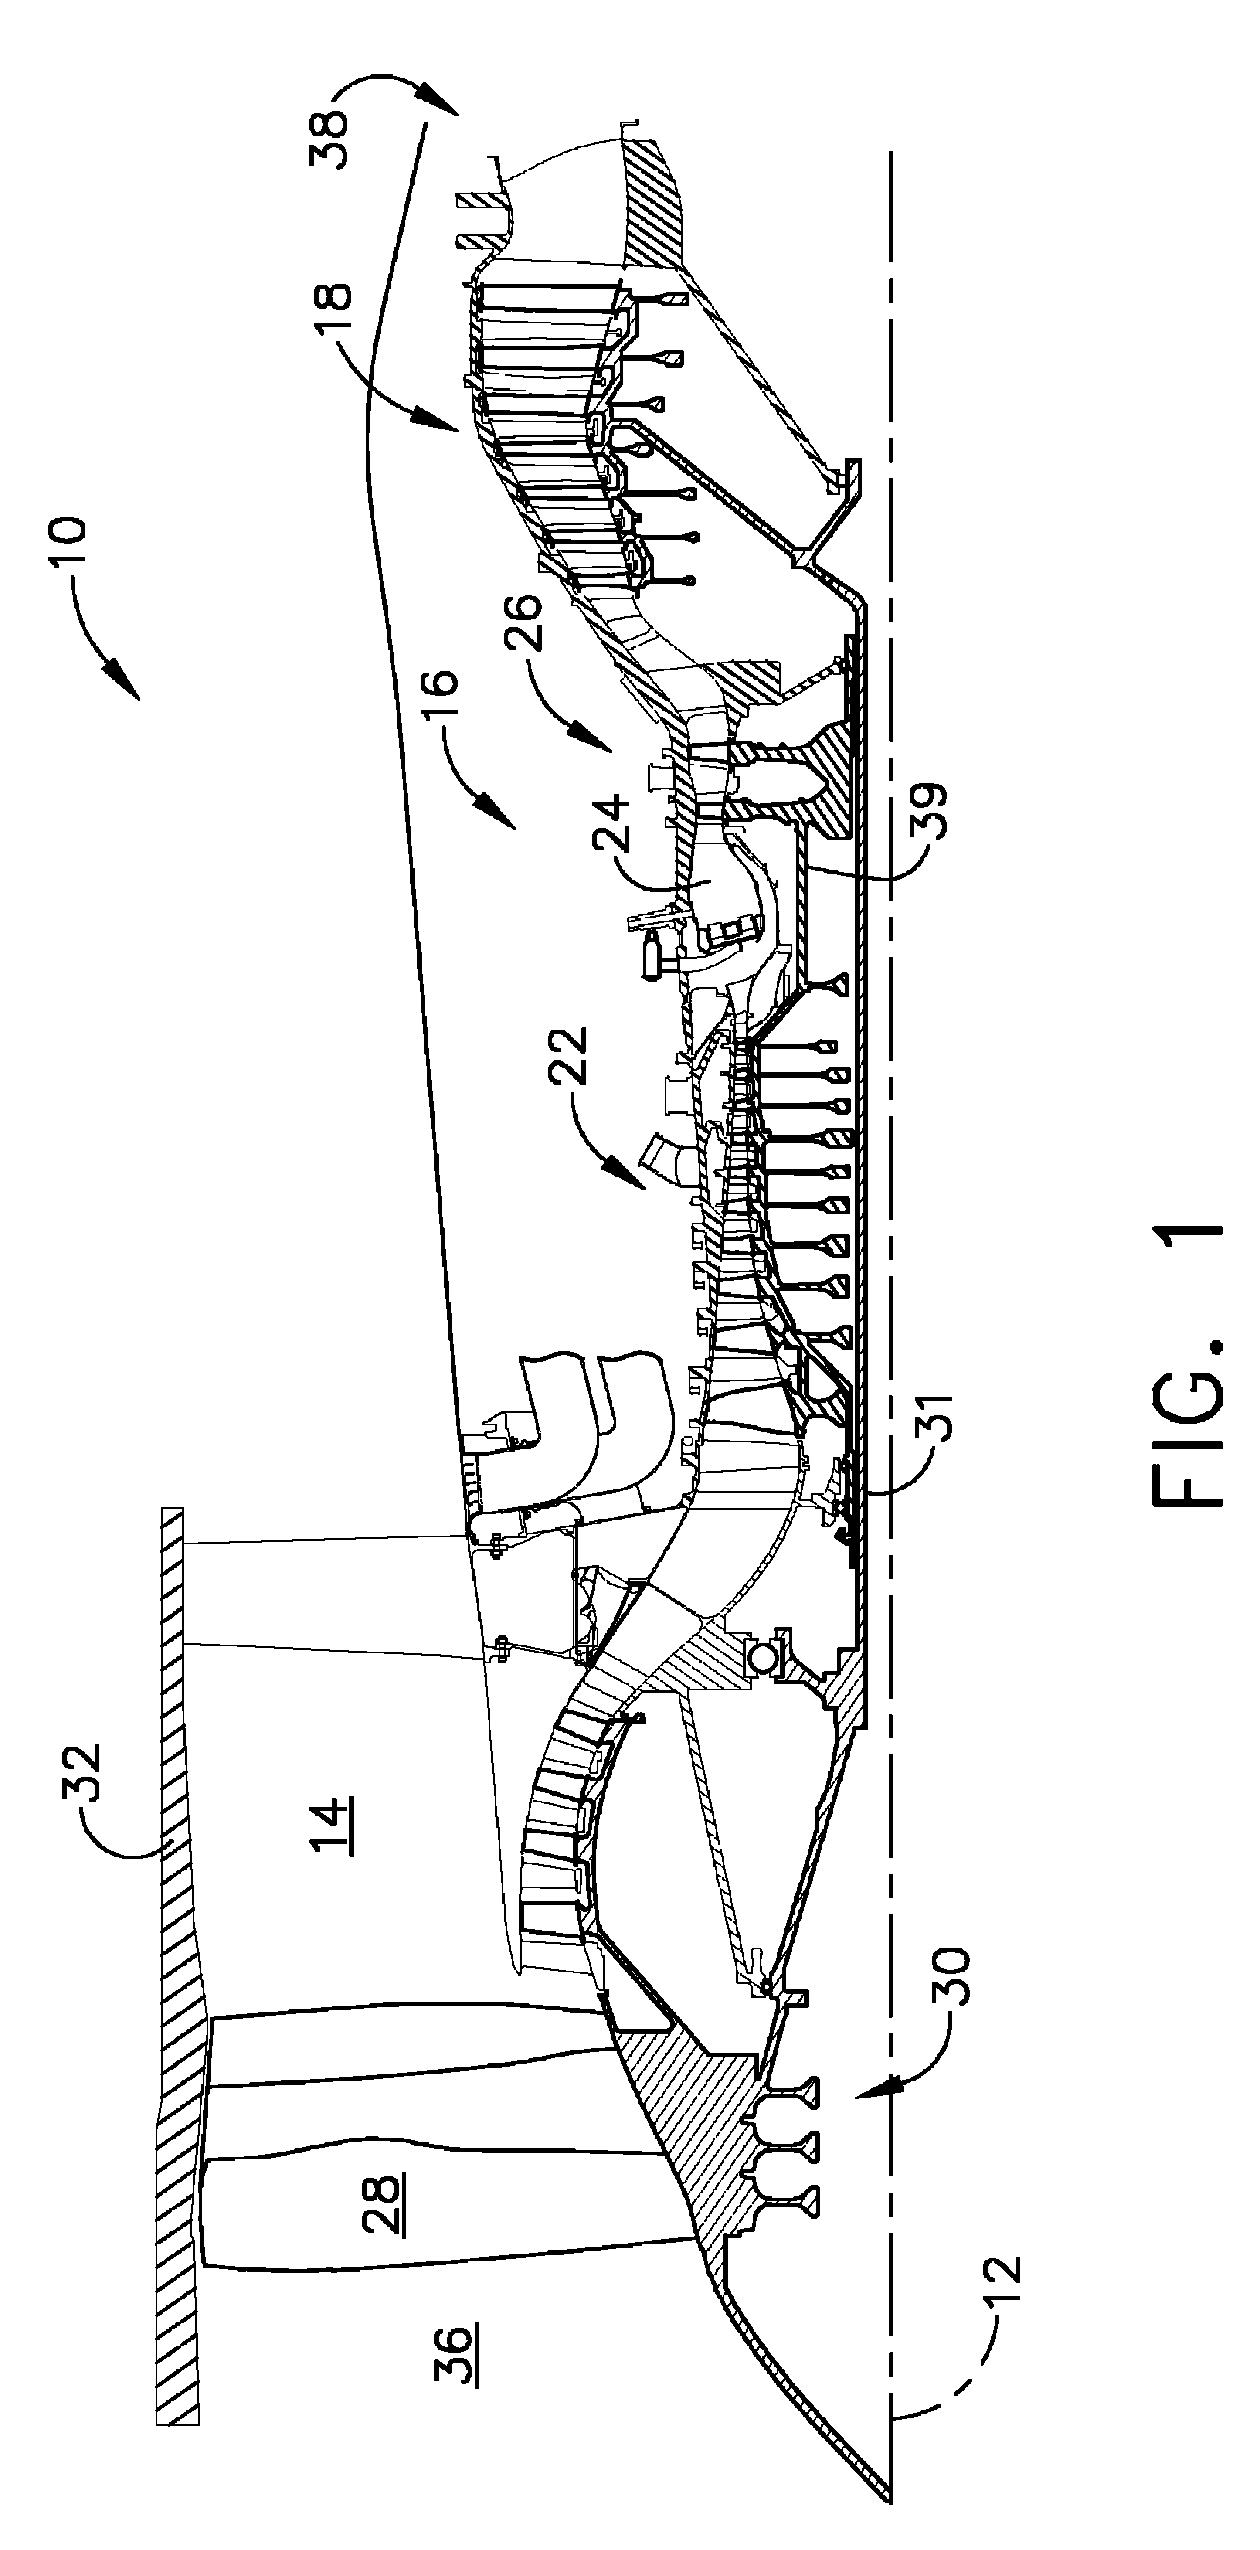 Method and apparatus for supporting rotor assemblies during unbalances